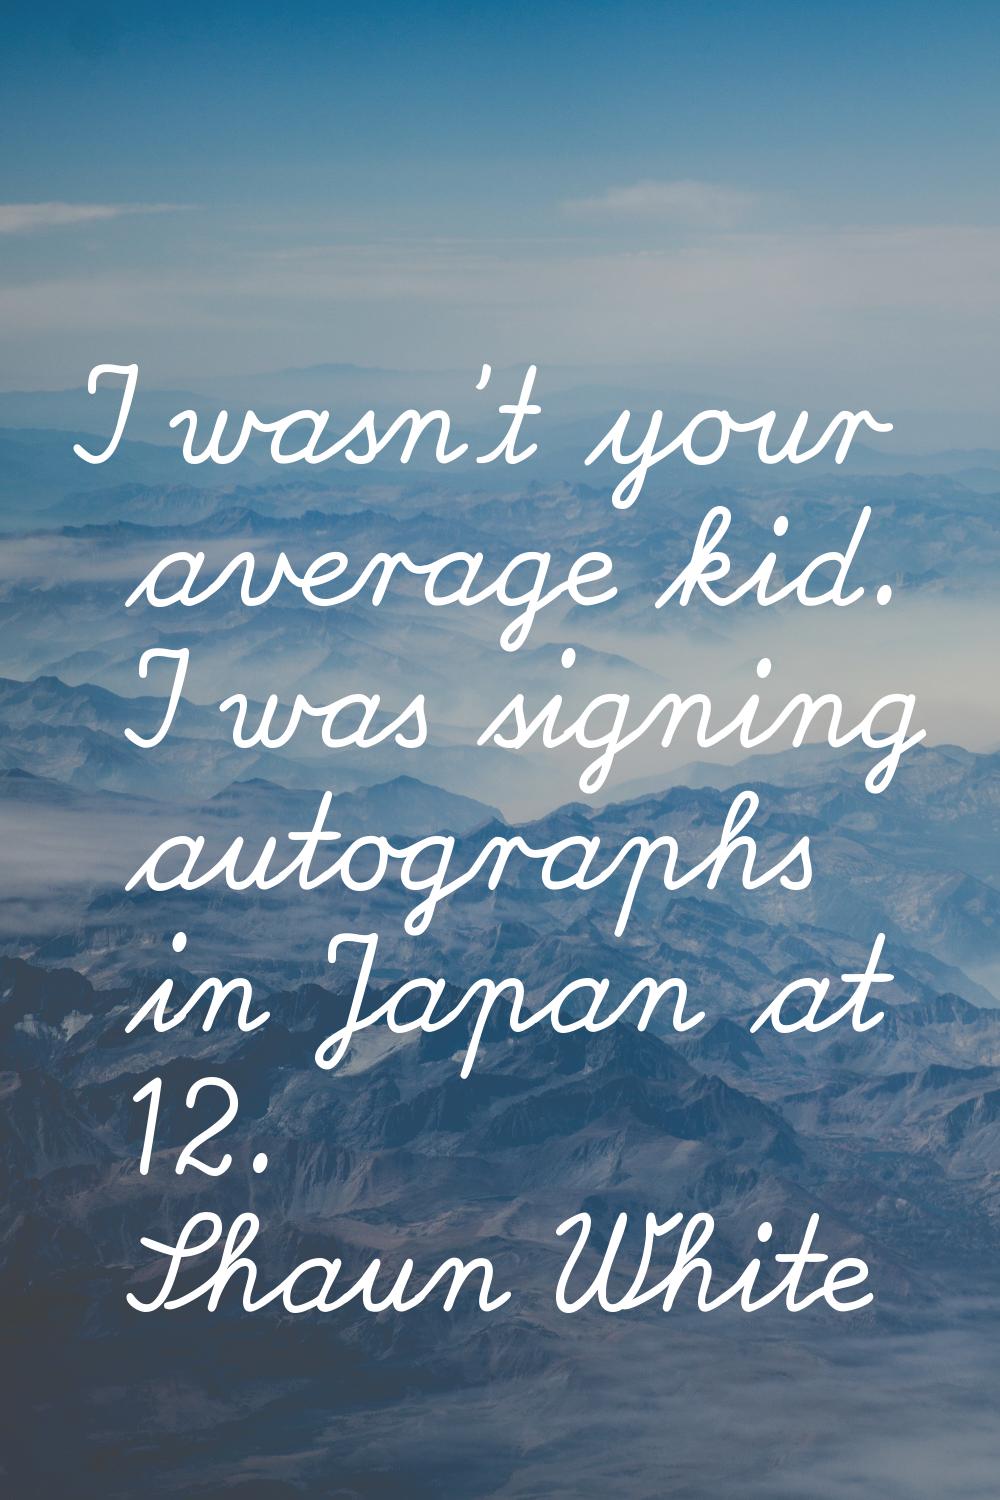 I wasn't your average kid. I was signing autographs in Japan at 12.